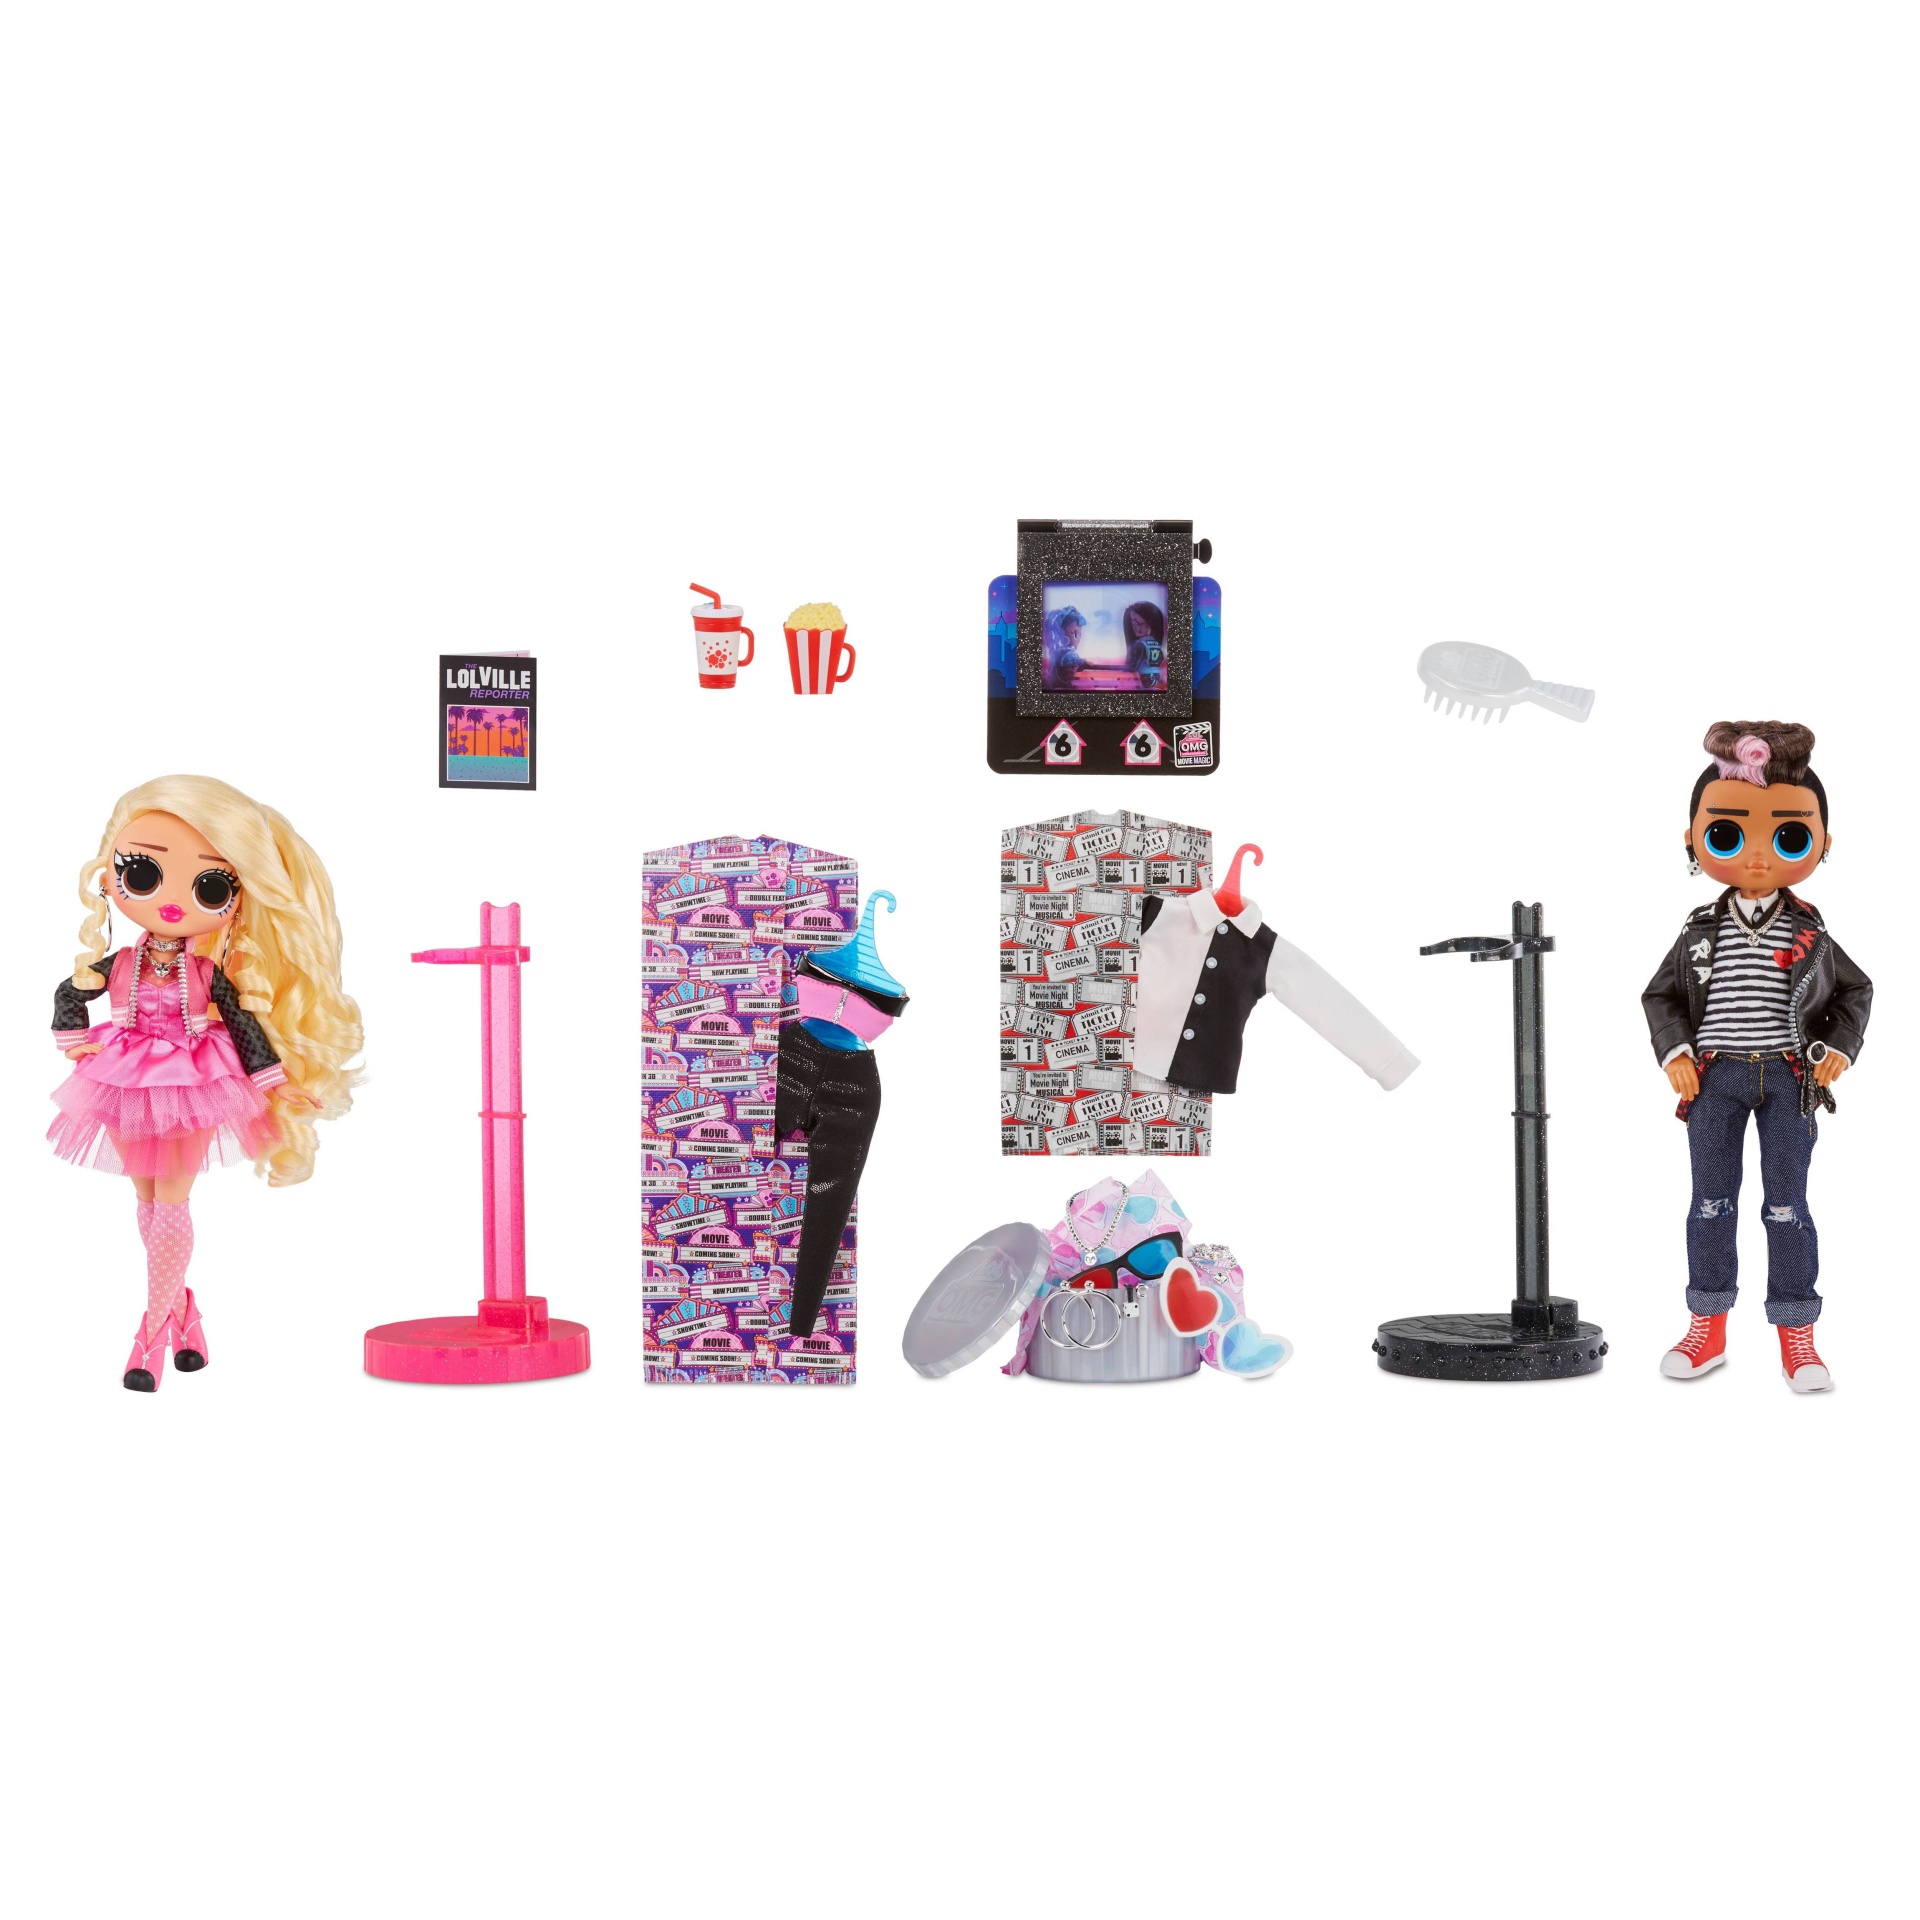 slide 1 of 7, L.O.L. Surprise! O.M.G. Movie Magic Tough Dude and Pink Chick Fashion Dolls, 2 ct